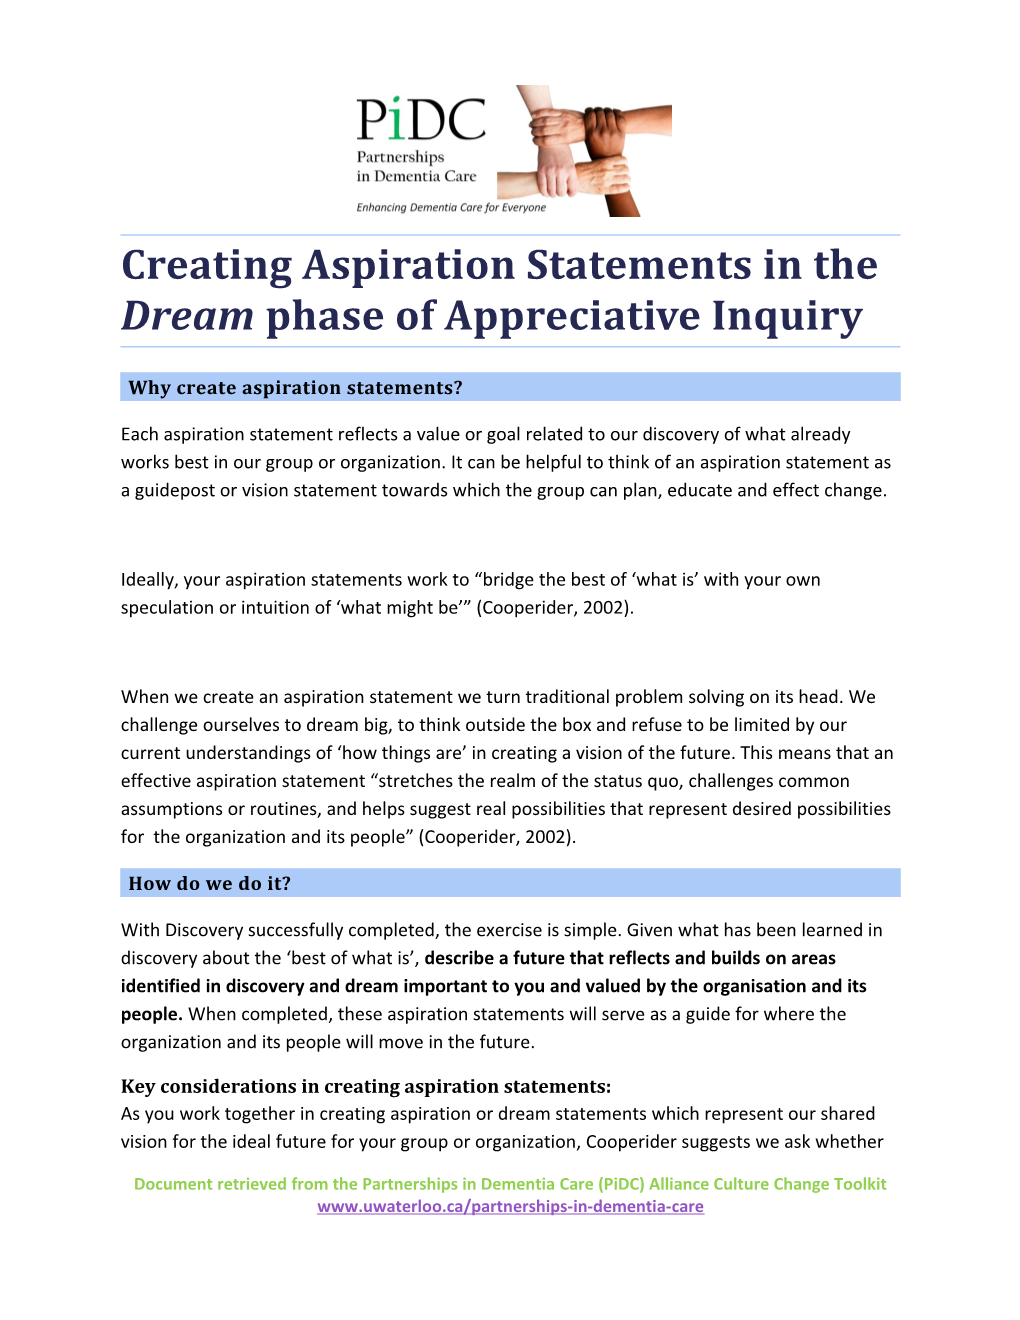 Creating Aspiration Statements in the Dream Phase of Appreciative Inquiry